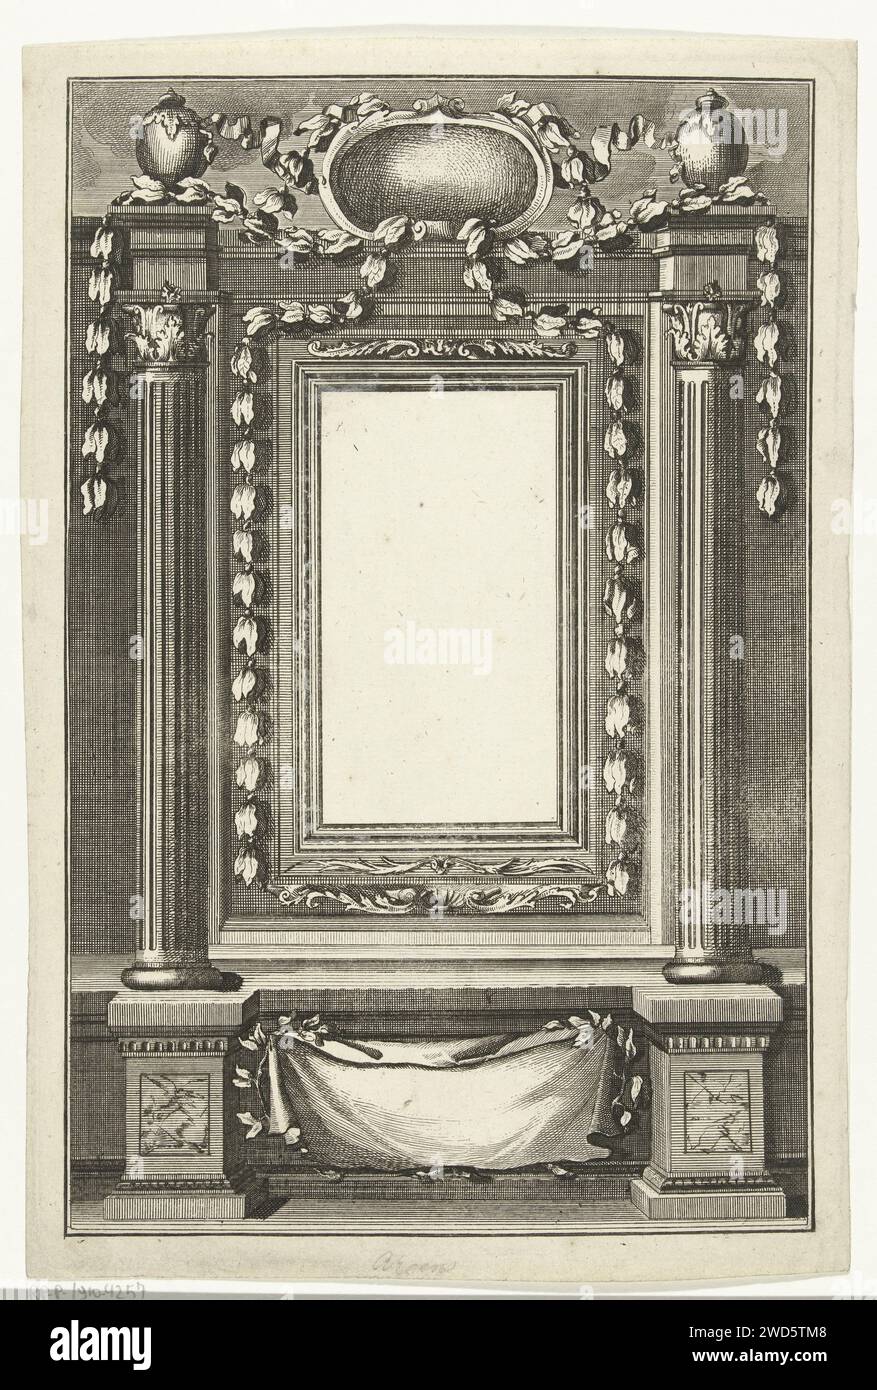 Frame, Gaspar Bouttats, 1650 - 1695 print Frame of a rectangular portrait. The portrait list is decorated with leaves. Two Corinthian columns flank the list. Antwerp paper etching Corinthian order  architecture Stock Photo